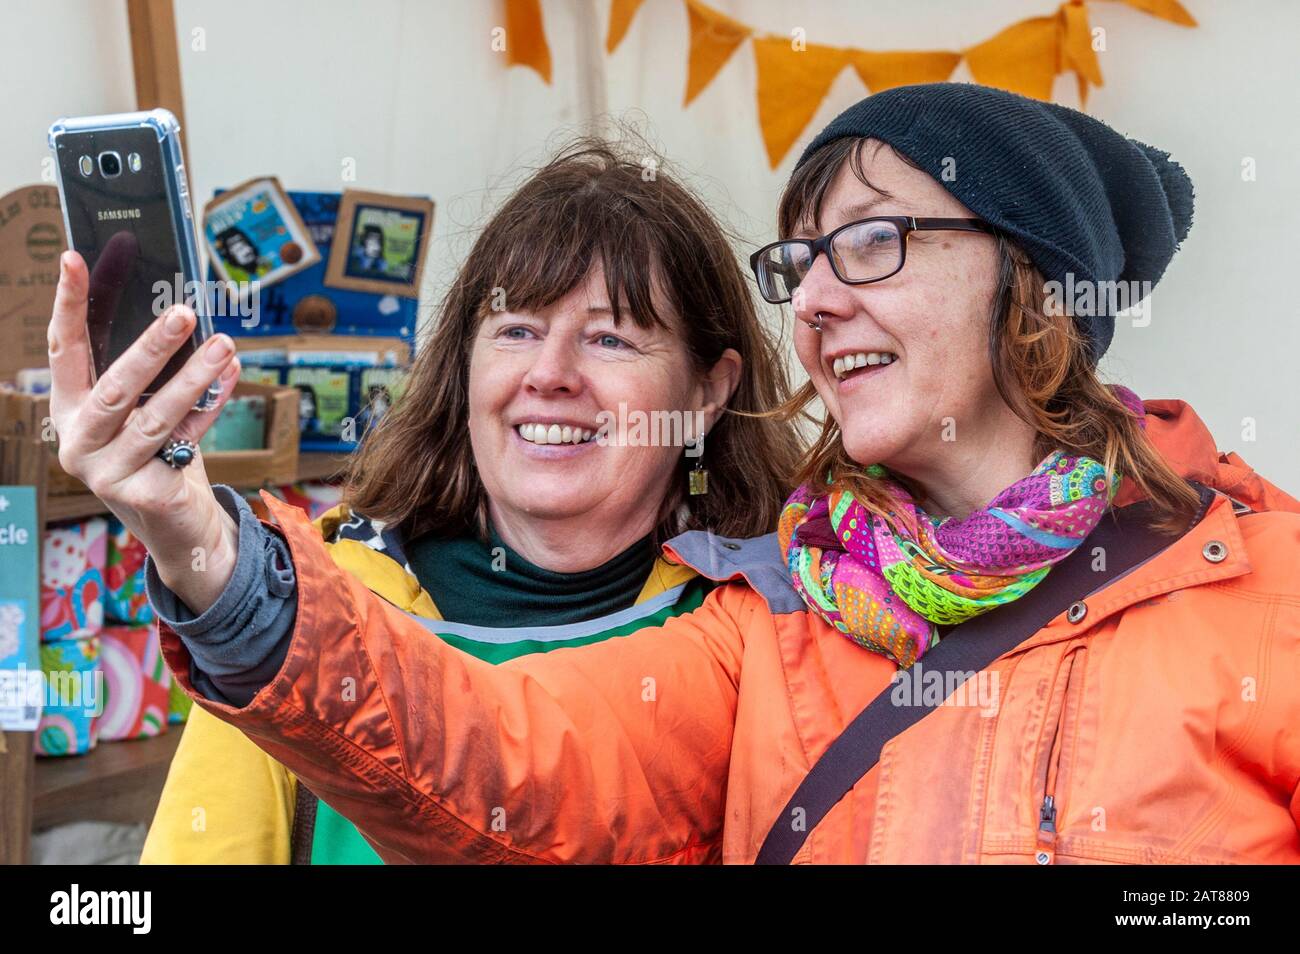 Bantry, West Cork, Ireland. 31st Jan, 2020. Bantry Friday Market was a hive of activity today with 4 general election candidates canvassing the locals. Bernadette Connolly (Greens) was out and about canvassing with her team. She took time for a selfie with Sarah Walsh from Cork city. Credt Credit: Andy Gibson/Alamy Live News Stock Photo